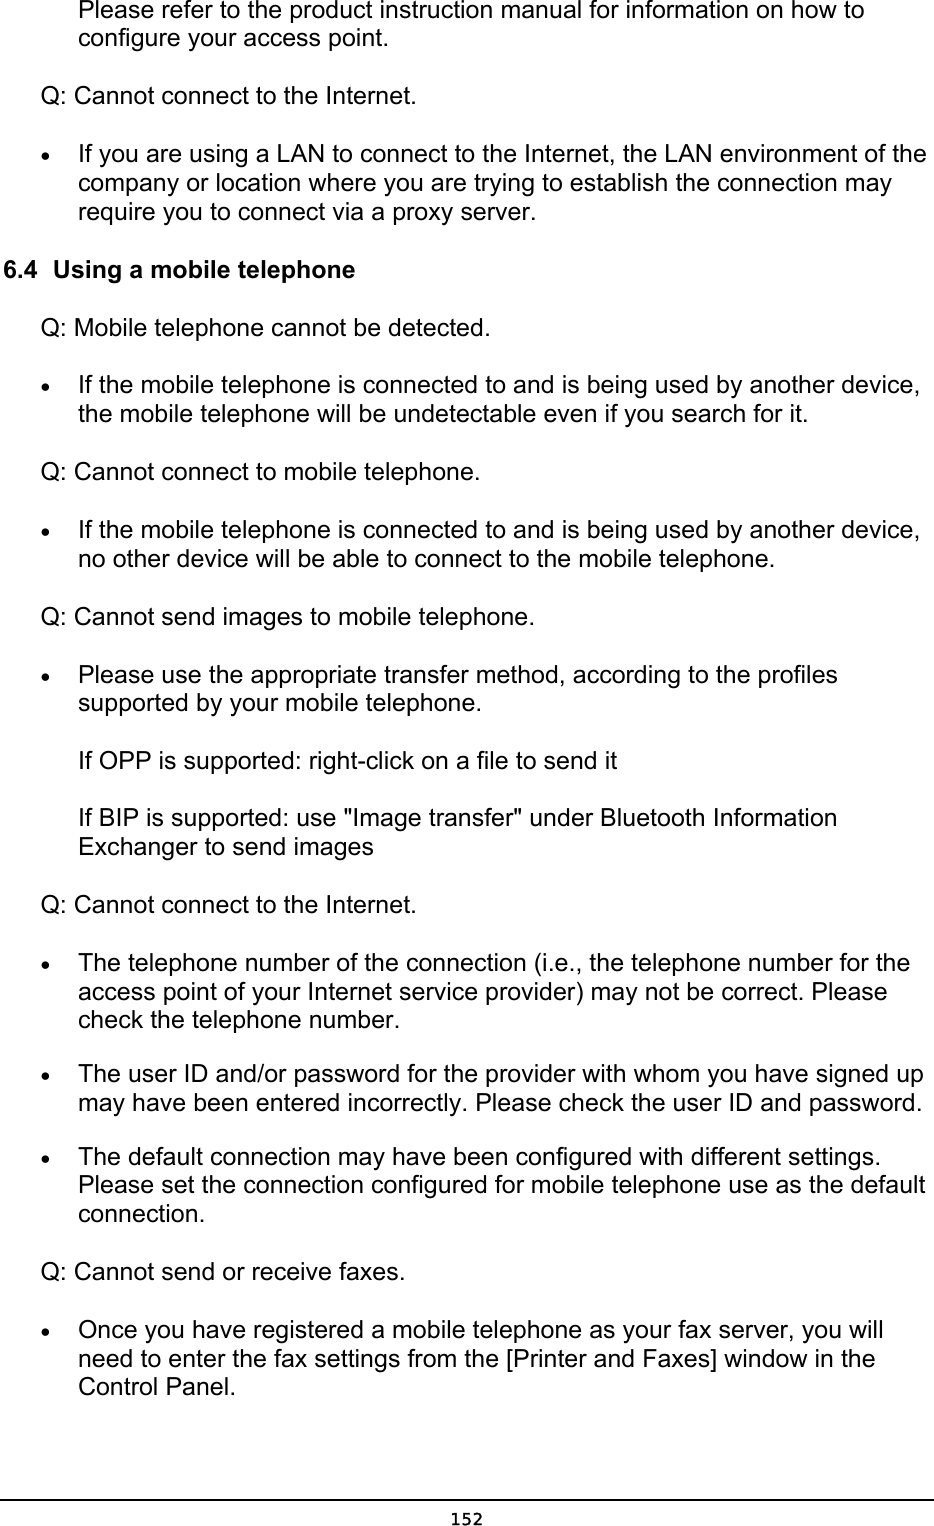  Please refer to the product instruction manual for information on how to configure your access point.   Q: Cannot connect to the Internet. •  If you are using a LAN to connect to the Internet, the LAN environment of the company or location where you are trying to establish the connection may require you to connect via a proxy server. 6.4  Using a mobile telephone Q: Mobile telephone cannot be detected. •  If the mobile telephone is connected to and is being used by another device, the mobile telephone will be undetectable even if you search for it.   Q: Cannot connect to mobile telephone. •  If the mobile telephone is connected to and is being used by another device, no other device will be able to connect to the mobile telephone. Q: Cannot send images to mobile telephone. •  Please use the appropriate transfer method, according to the profiles supported by your mobile telephone.  If OPP is supported: right-click on a file to send it  If BIP is supported: use &quot;Image transfer&quot; under Bluetooth Information Exchanger to send images Q: Cannot connect to the Internet. •  The telephone number of the connection (i.e., the telephone number for the access point of your Internet service provider) may not be correct. Please check the telephone number. •  The user ID and/or password for the provider with whom you have signed up may have been entered incorrectly. Please check the user ID and password. •  The default connection may have been configured with different settings. Please set the connection configured for mobile telephone use as the default connection. Q: Cannot send or receive faxes. •  Once you have registered a mobile telephone as your fax server, you will need to enter the fax settings from the [Printer and Faxes] window in the Control Panel.  152